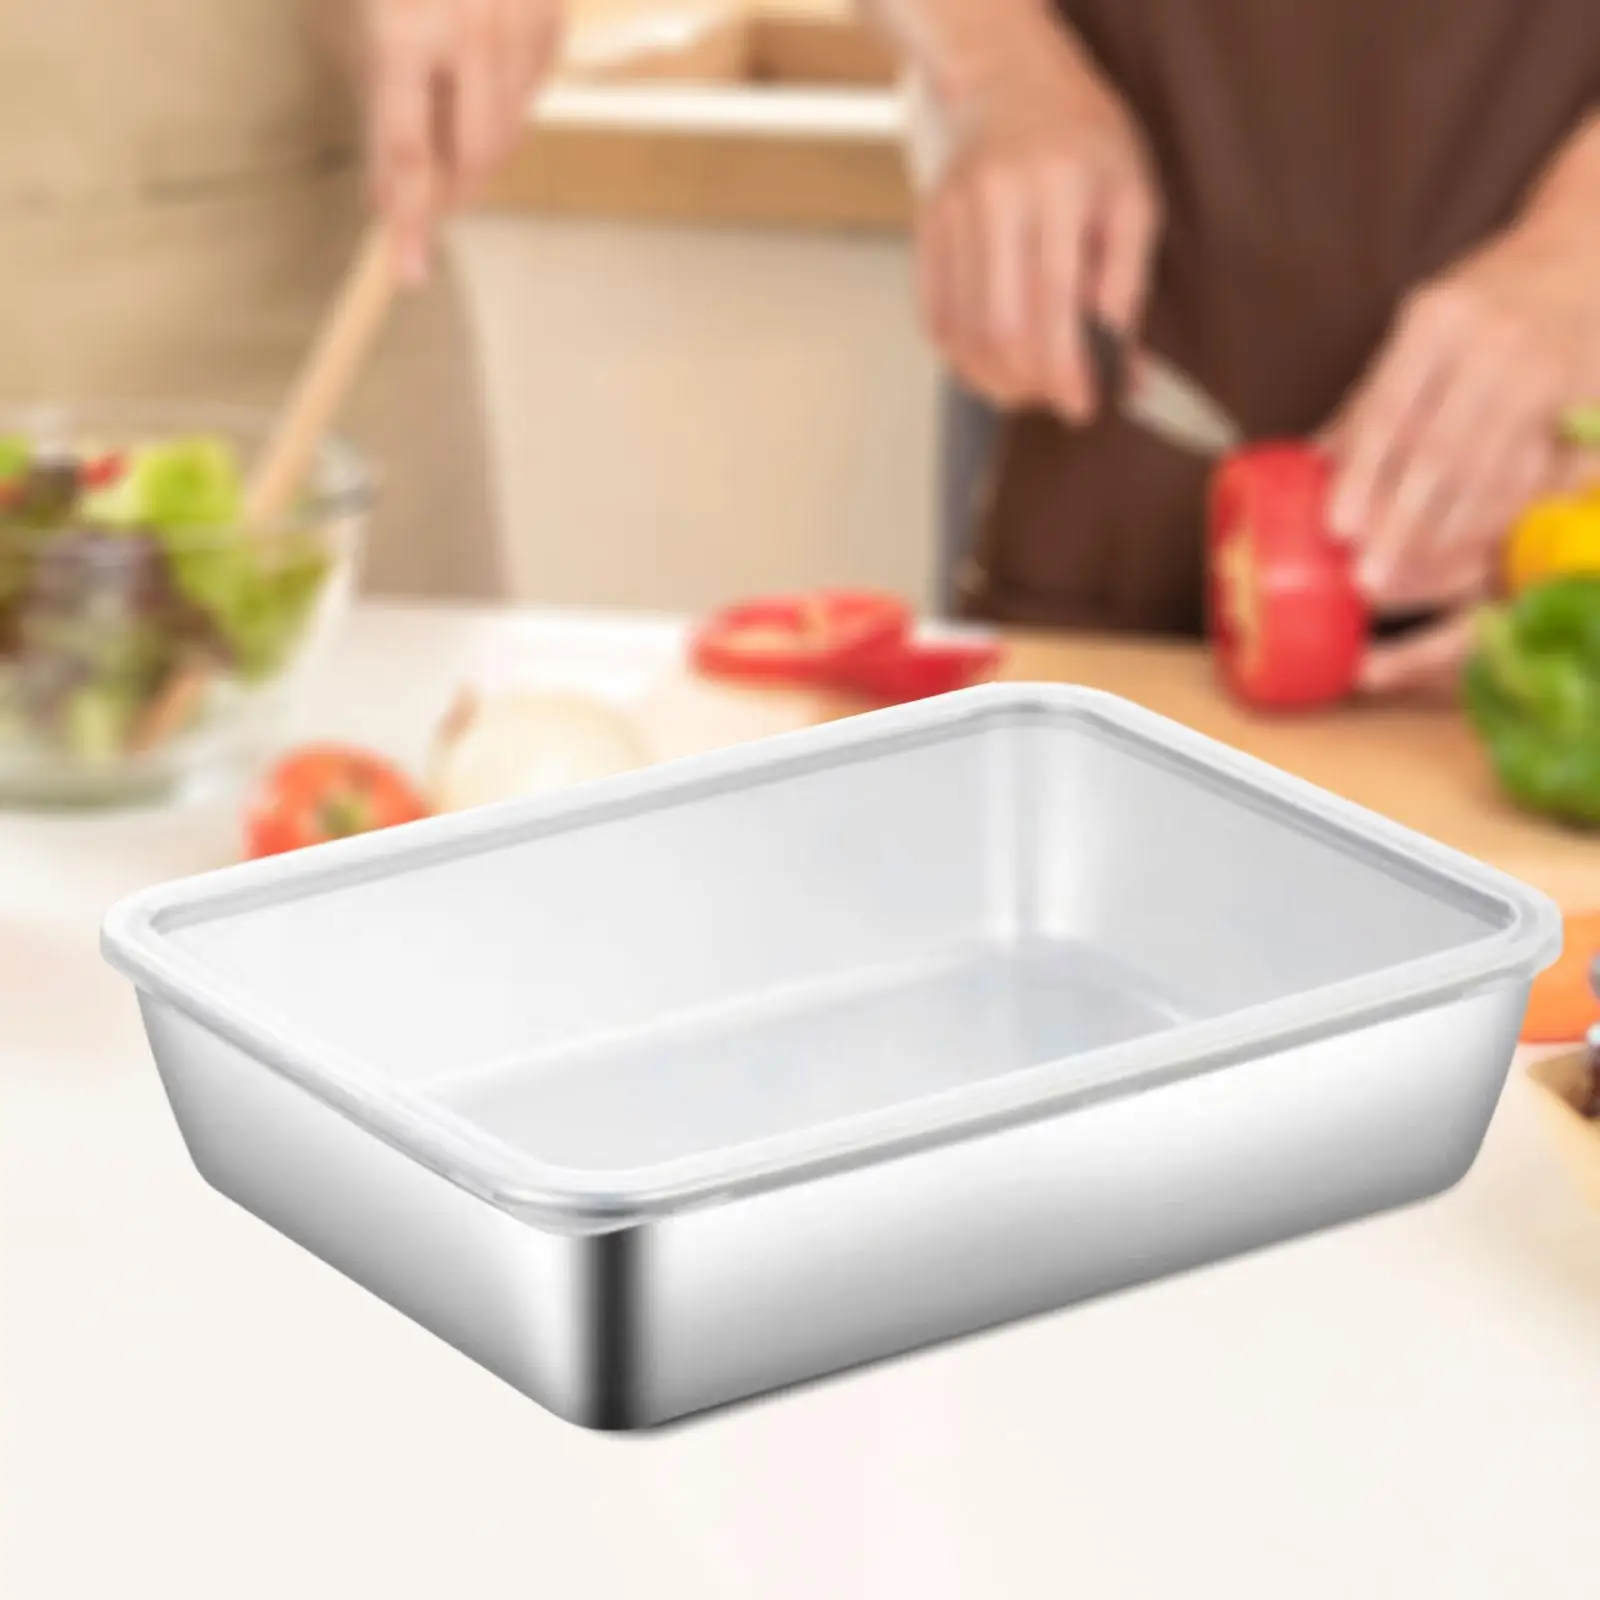 Stainless Steel Plate with Cover Metal Tableware High Temperature Baking Serving Tray for Party Barbecue Picnics Outdoor Camping